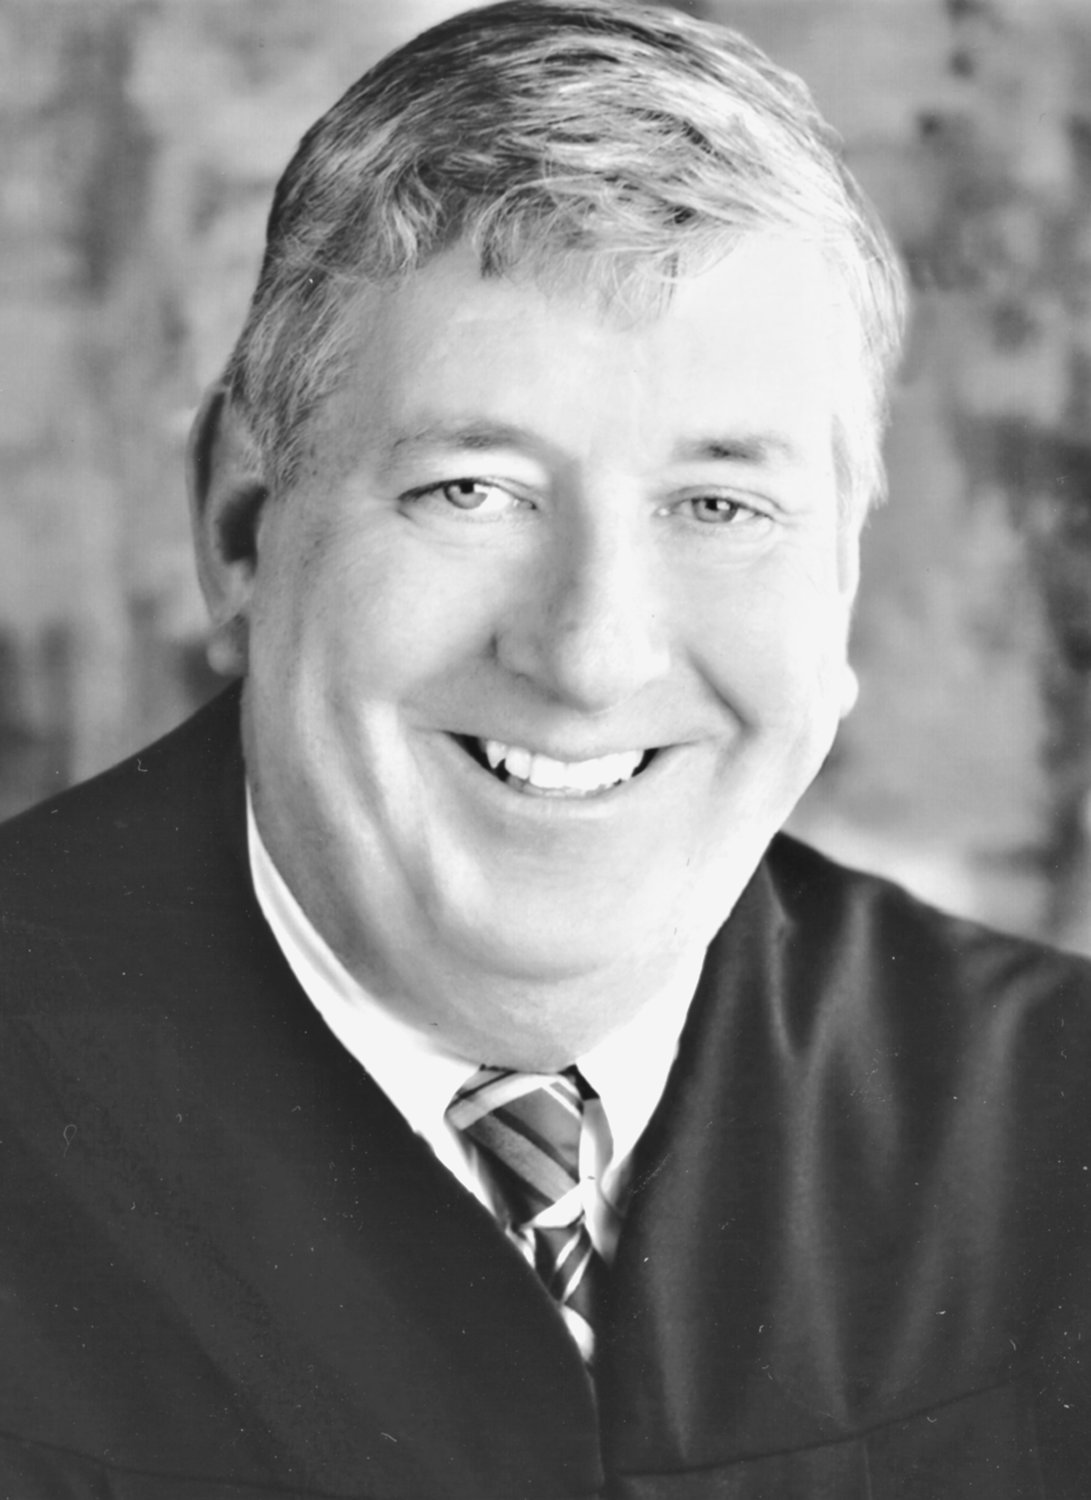 Rome City Court Judge John C. Gannon is running for re-election to the bench in November.